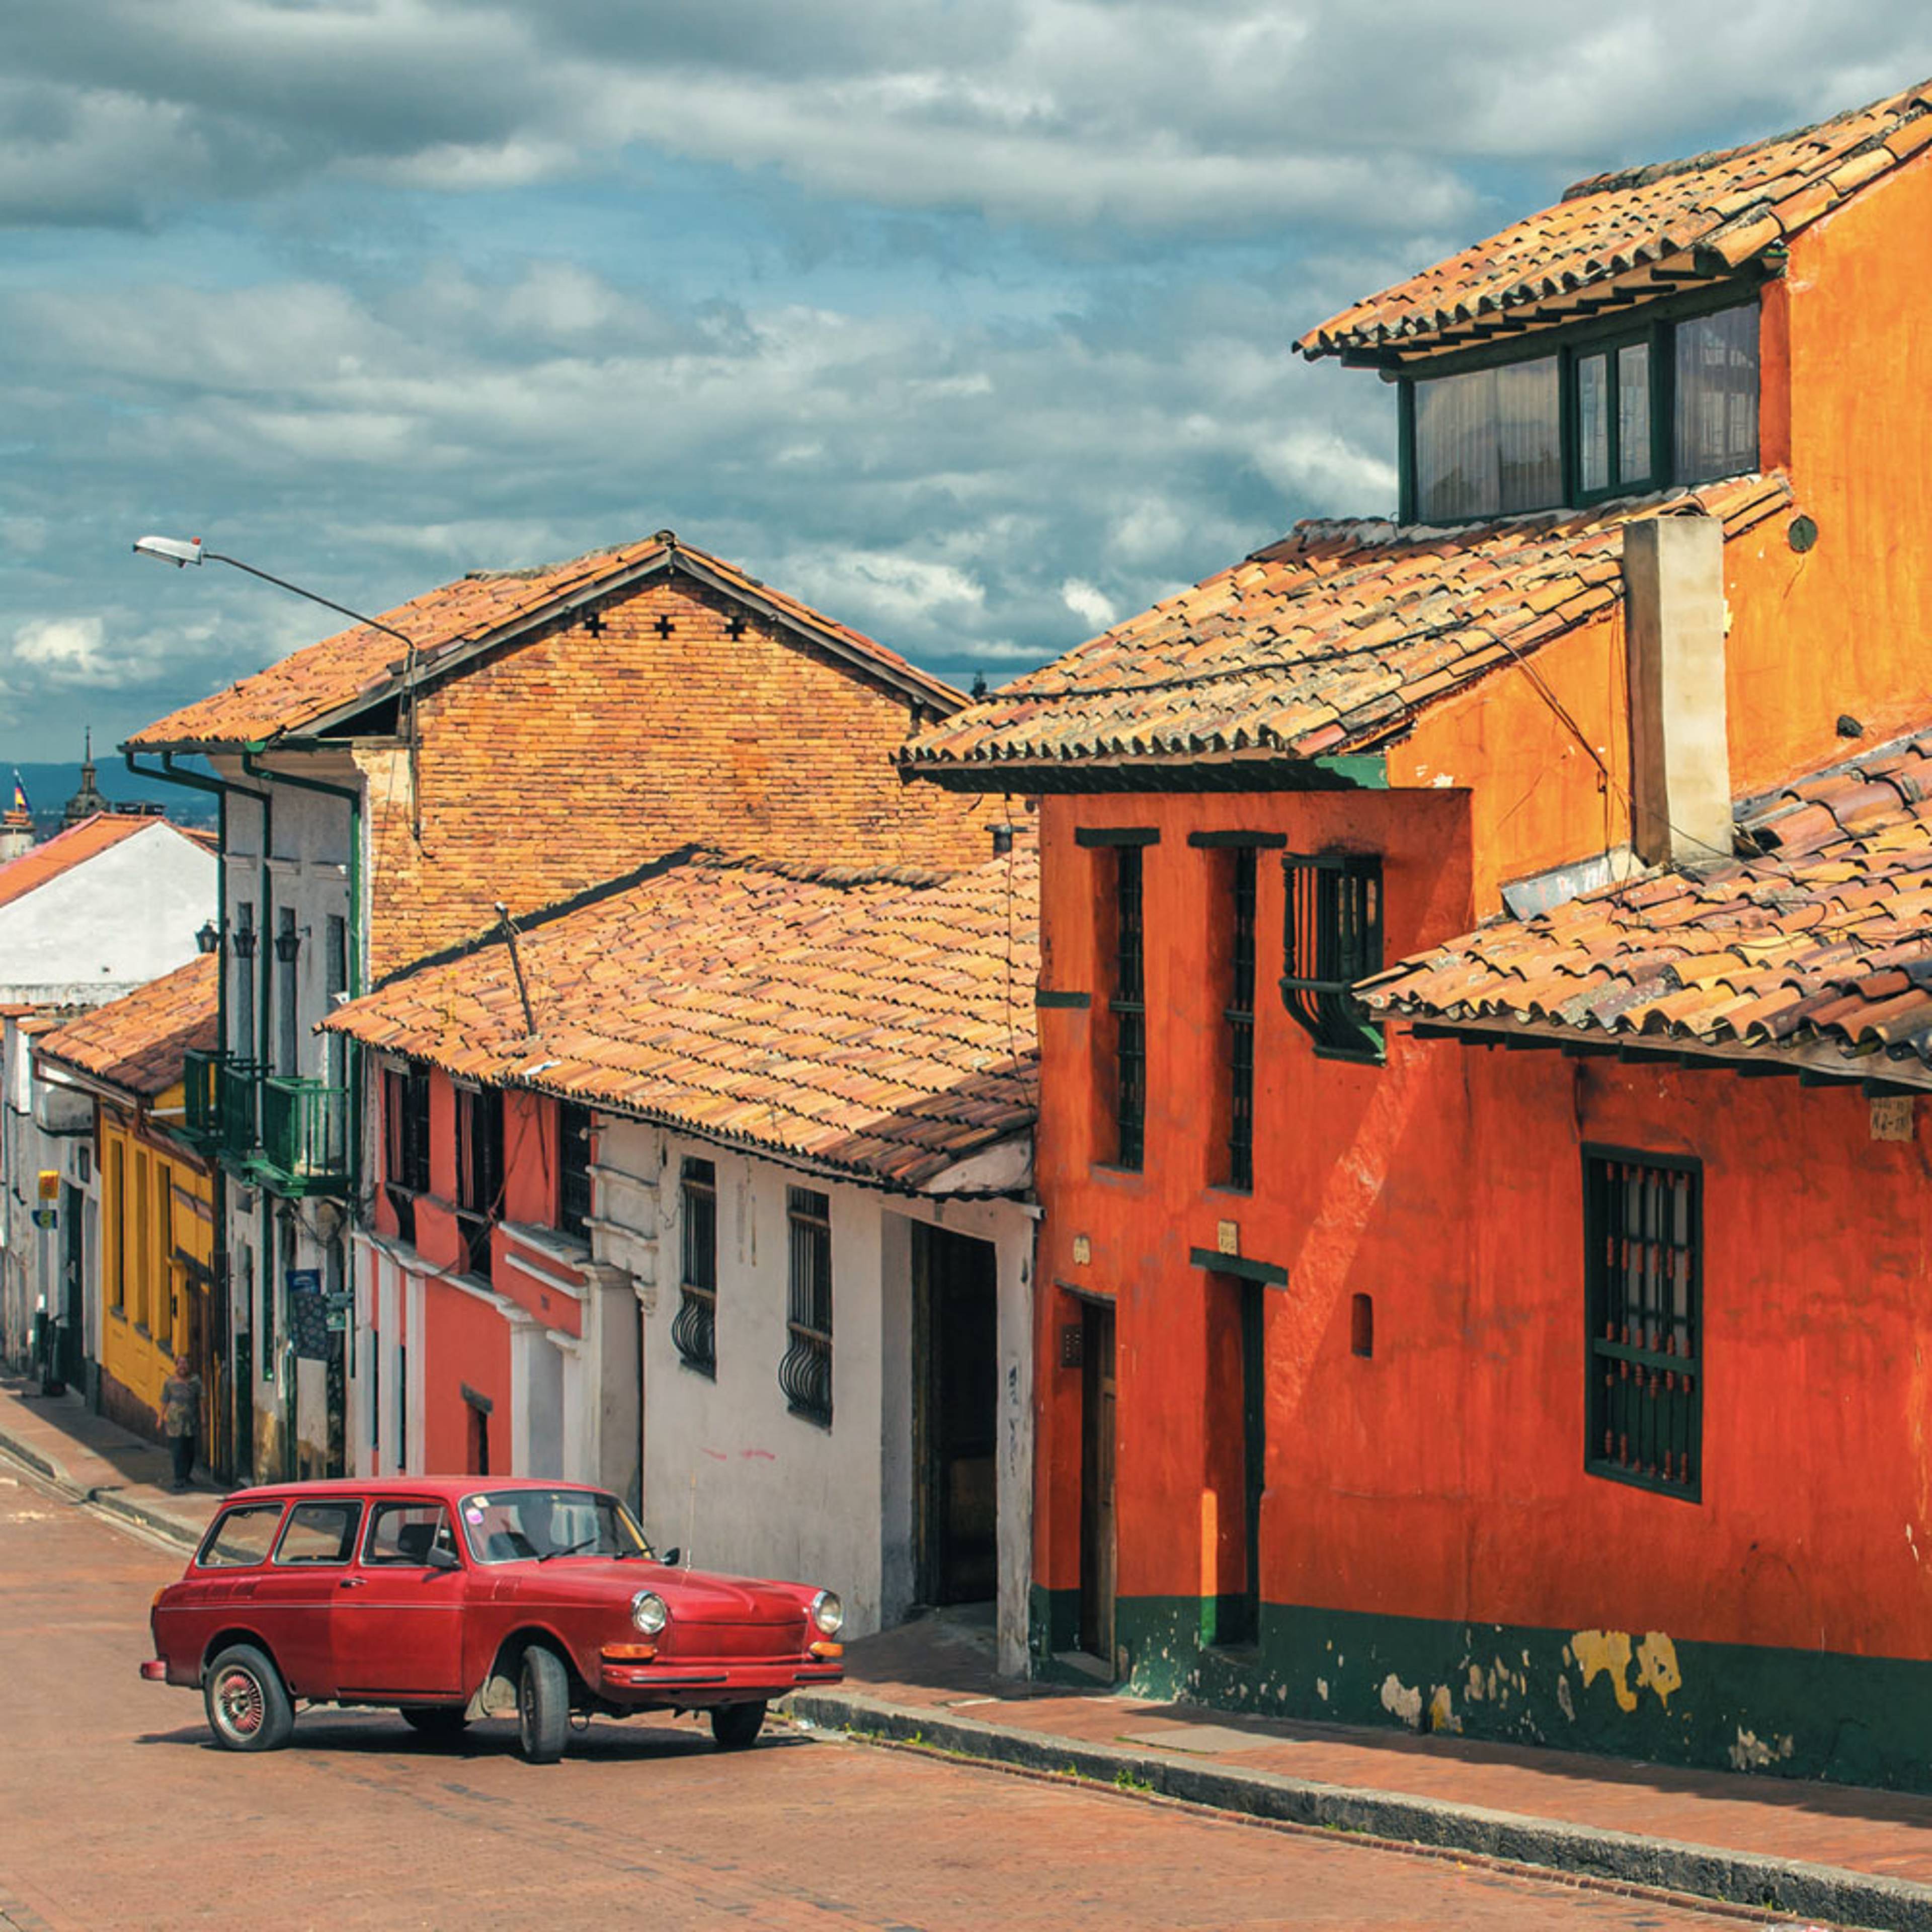 Design your perfect city tour with a local expert in Colombia